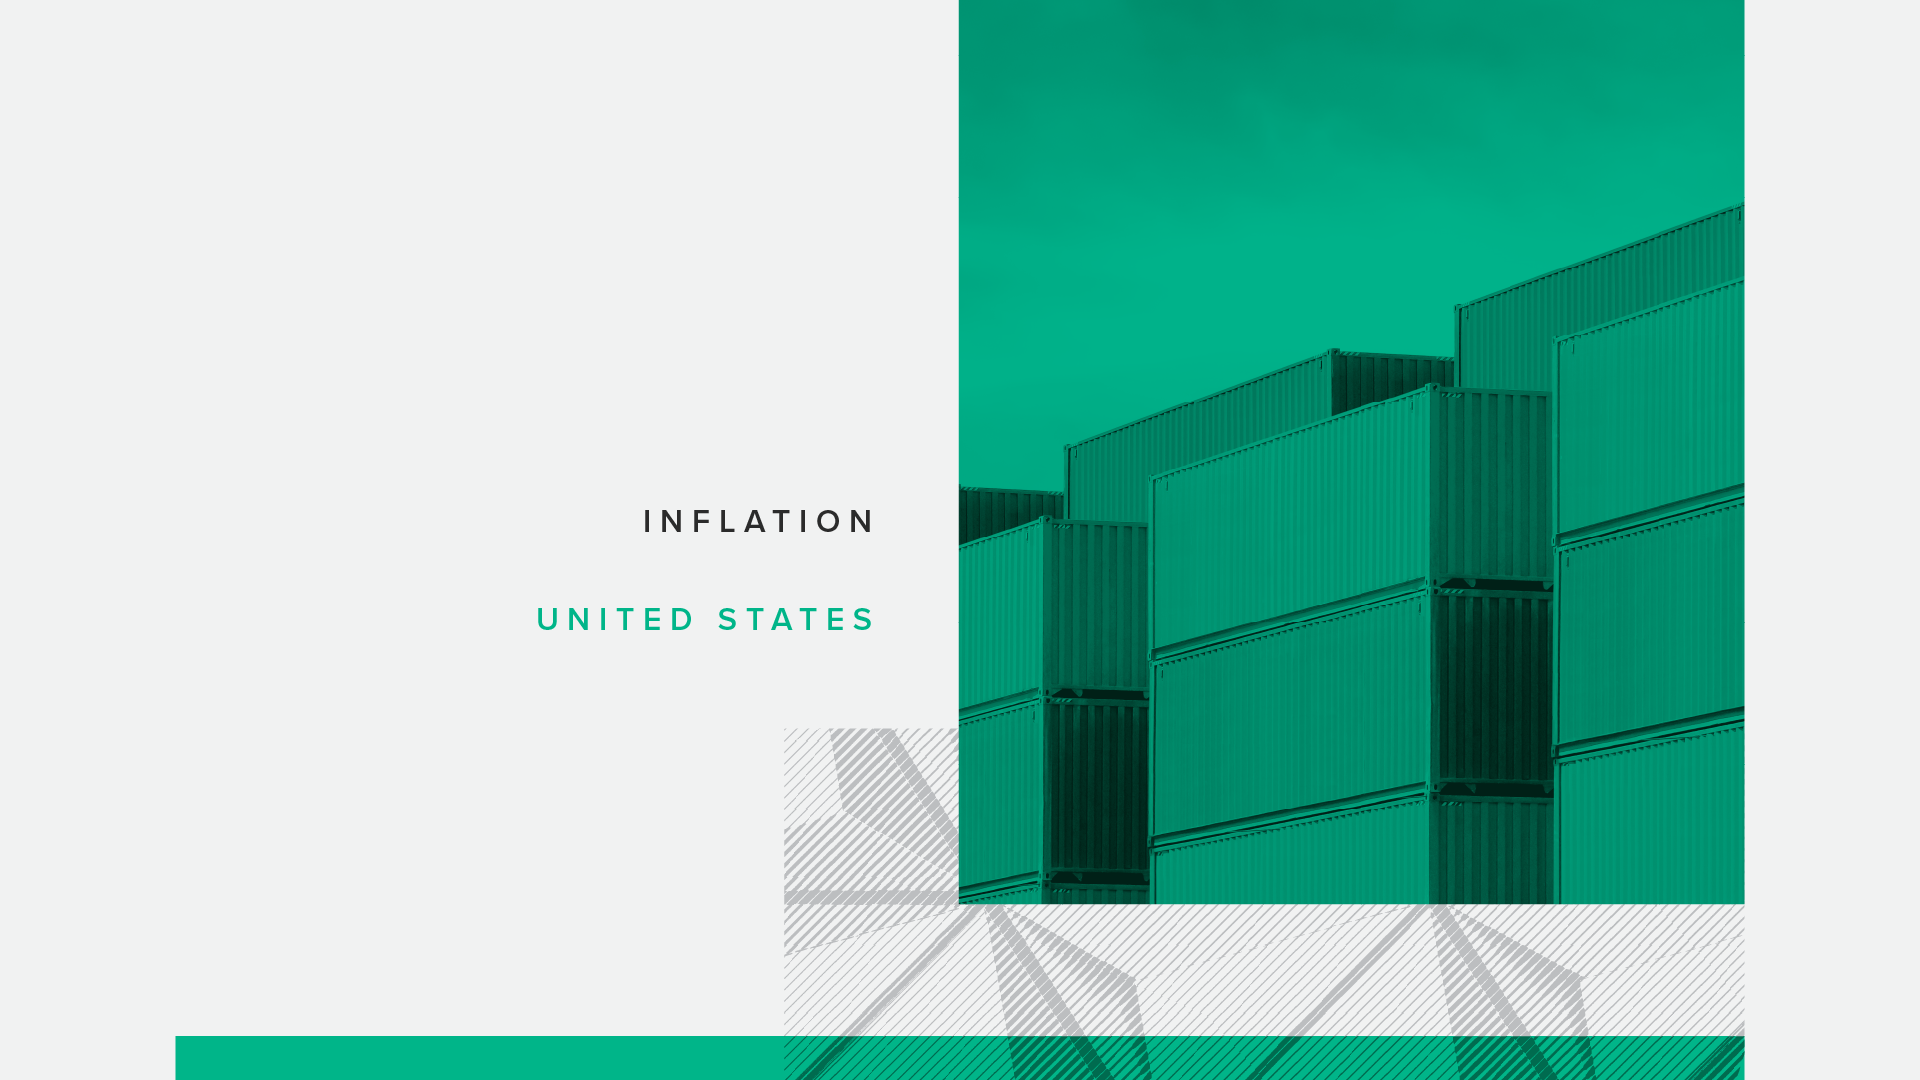 Guide to interpreting Morning Consult's U.S. Supply Chain and Inflation report